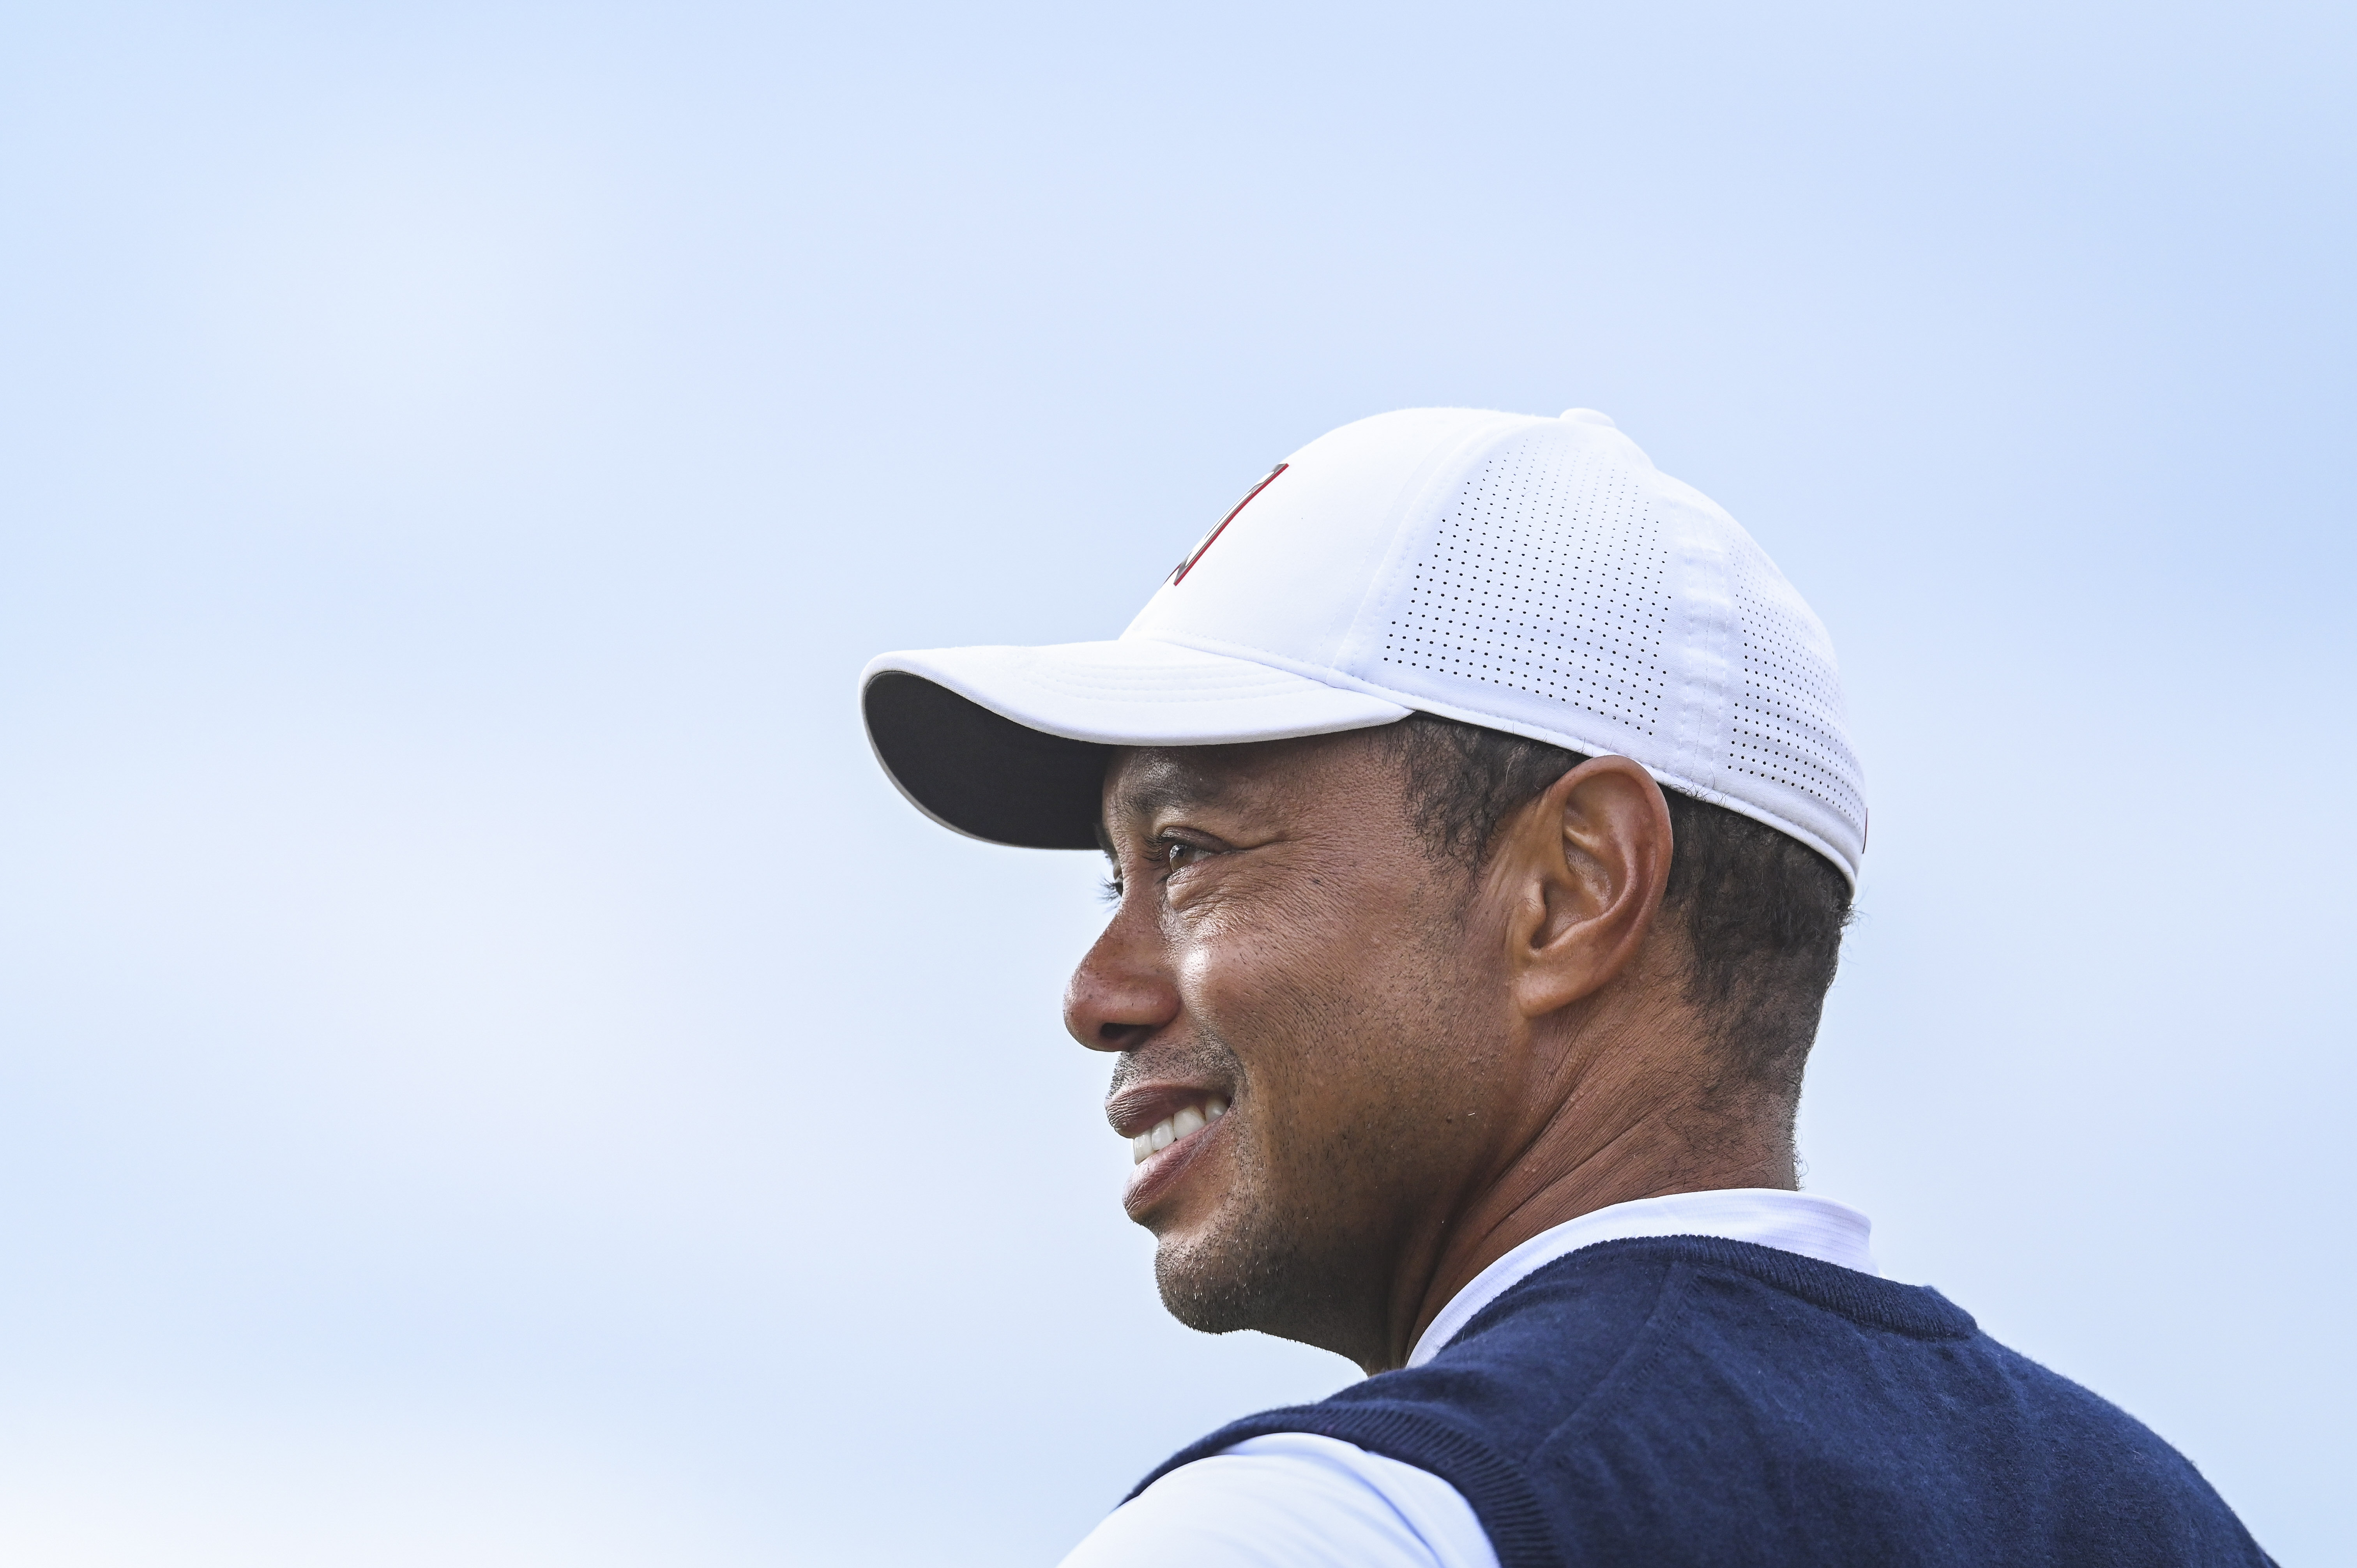 Tiger Woods declined up to $800M to play golf tour LIV Golf